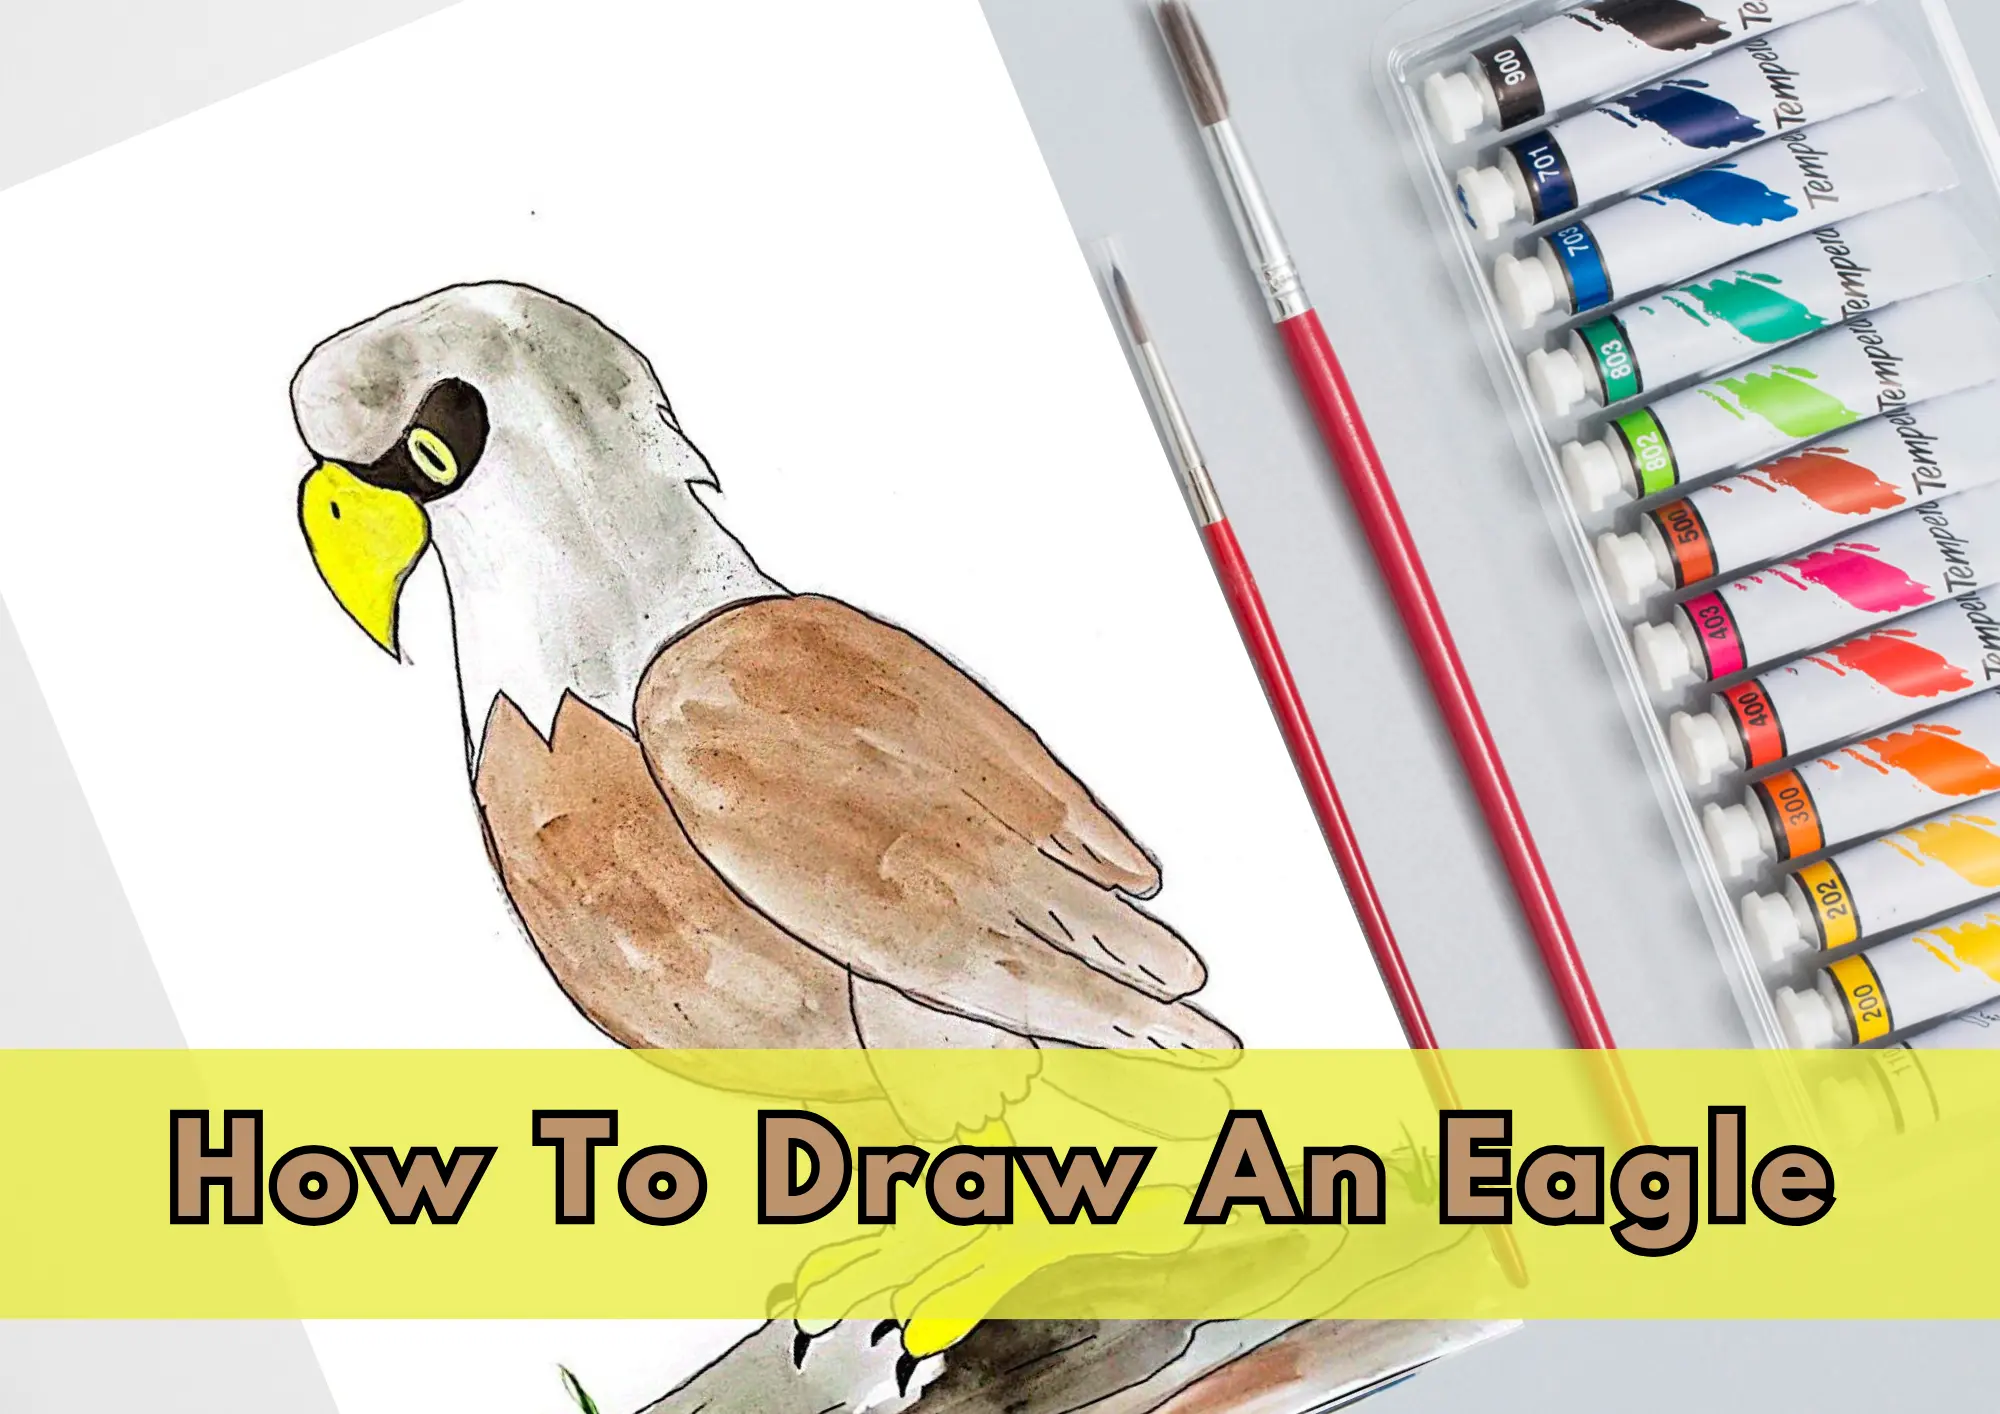 How to draw an eagle easy step by step for kids - YouTube